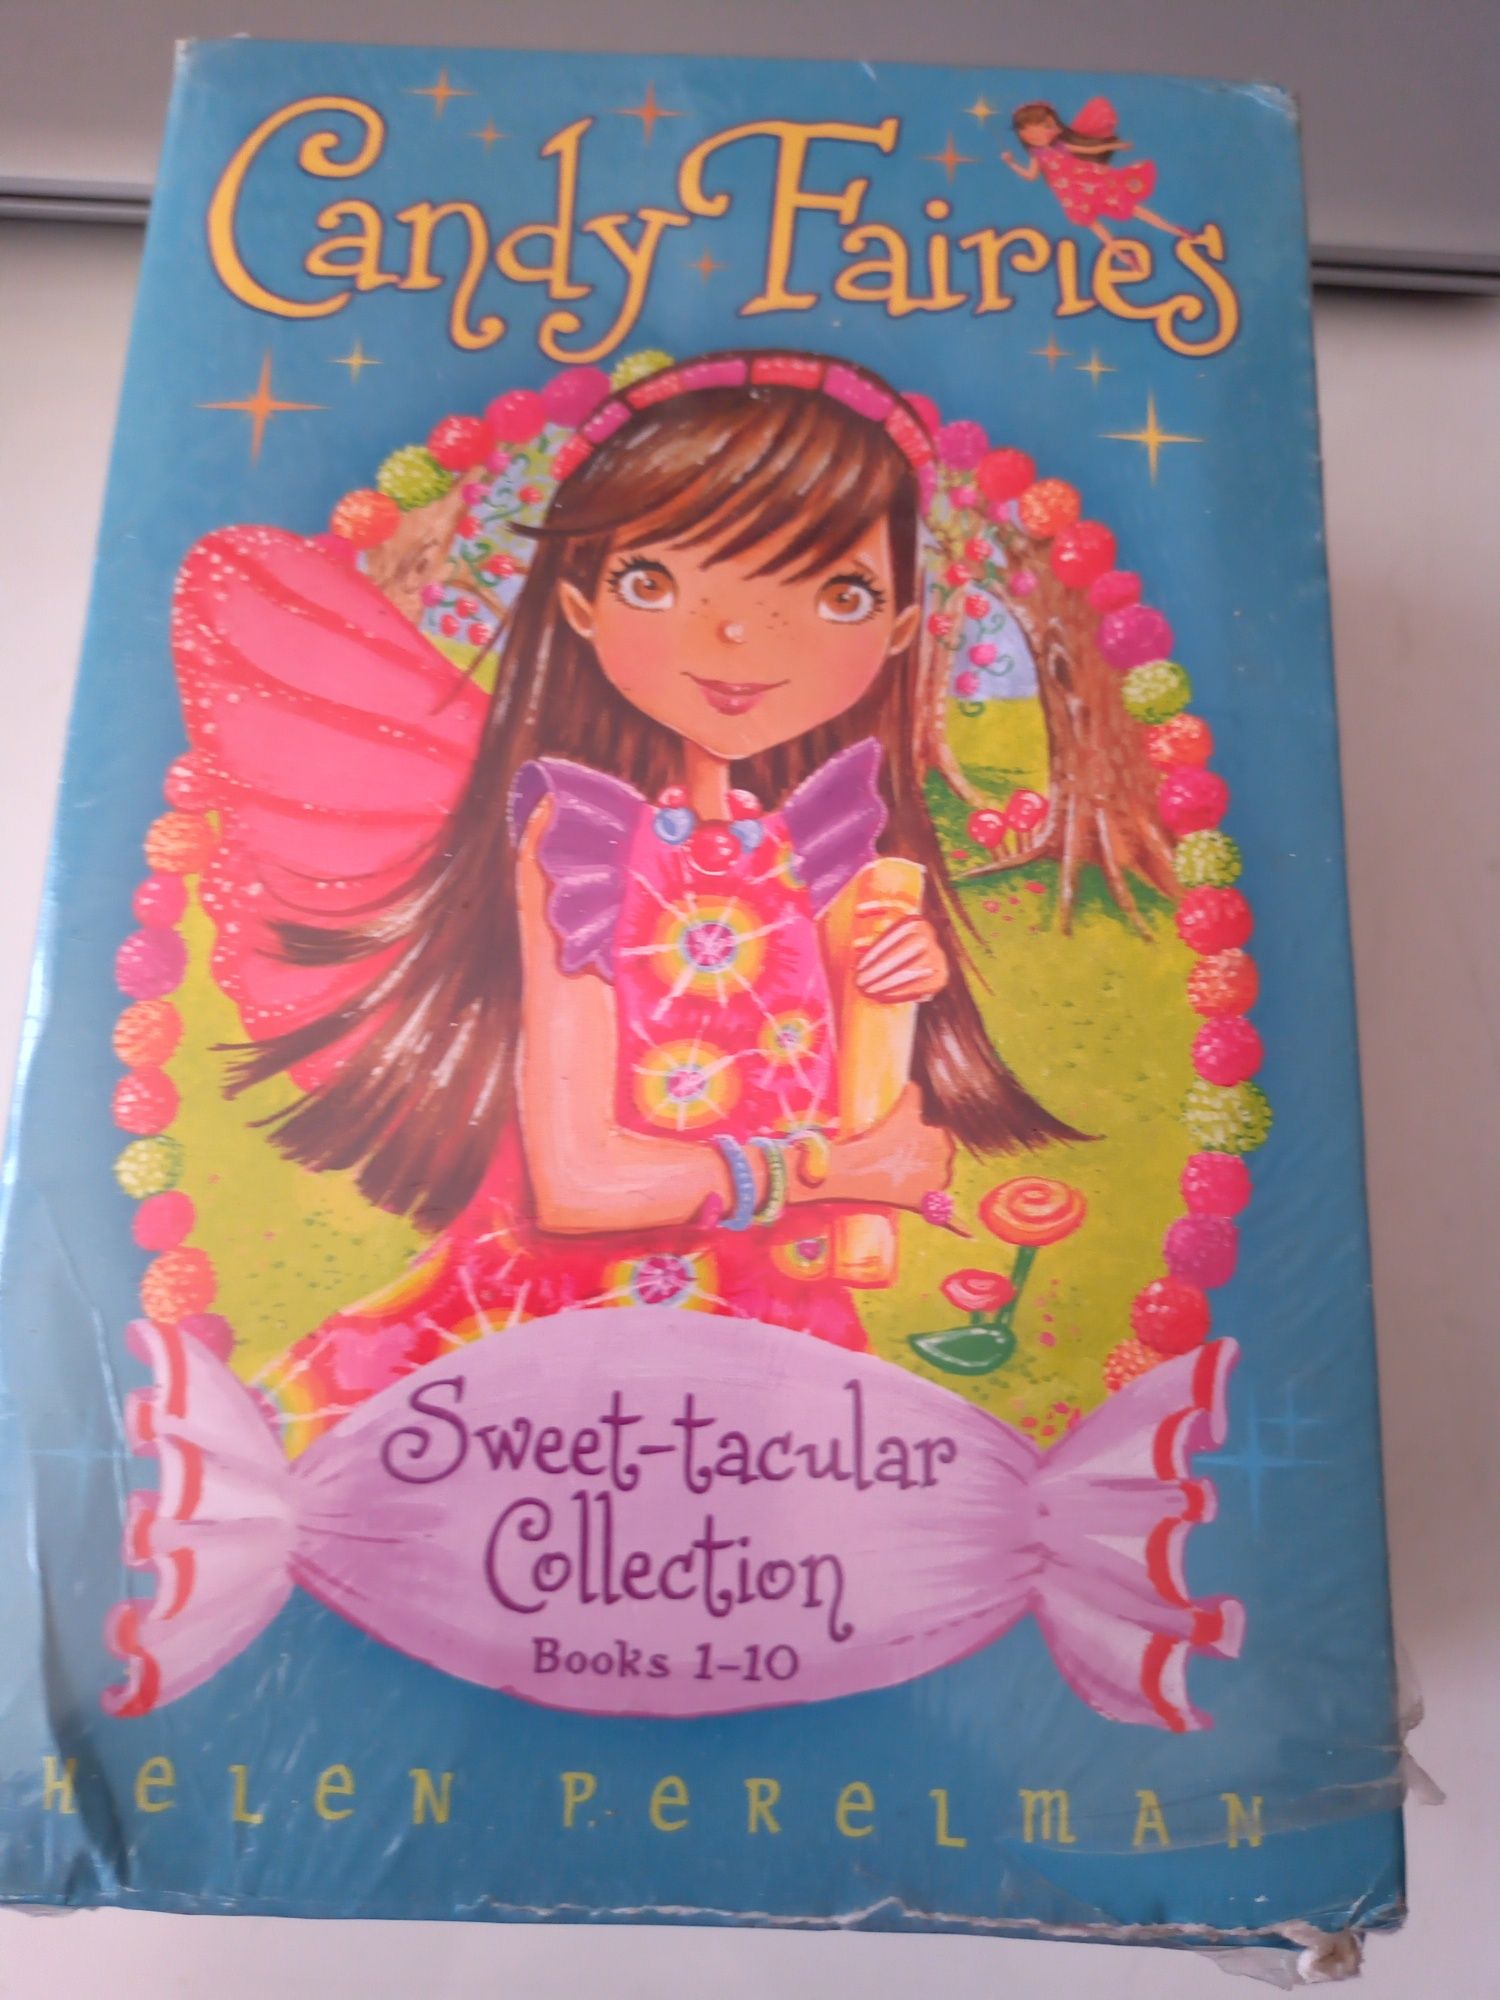 Candy Fairies Sweet-Tacular Collection Books 1-10: Chocolate Dreams; R